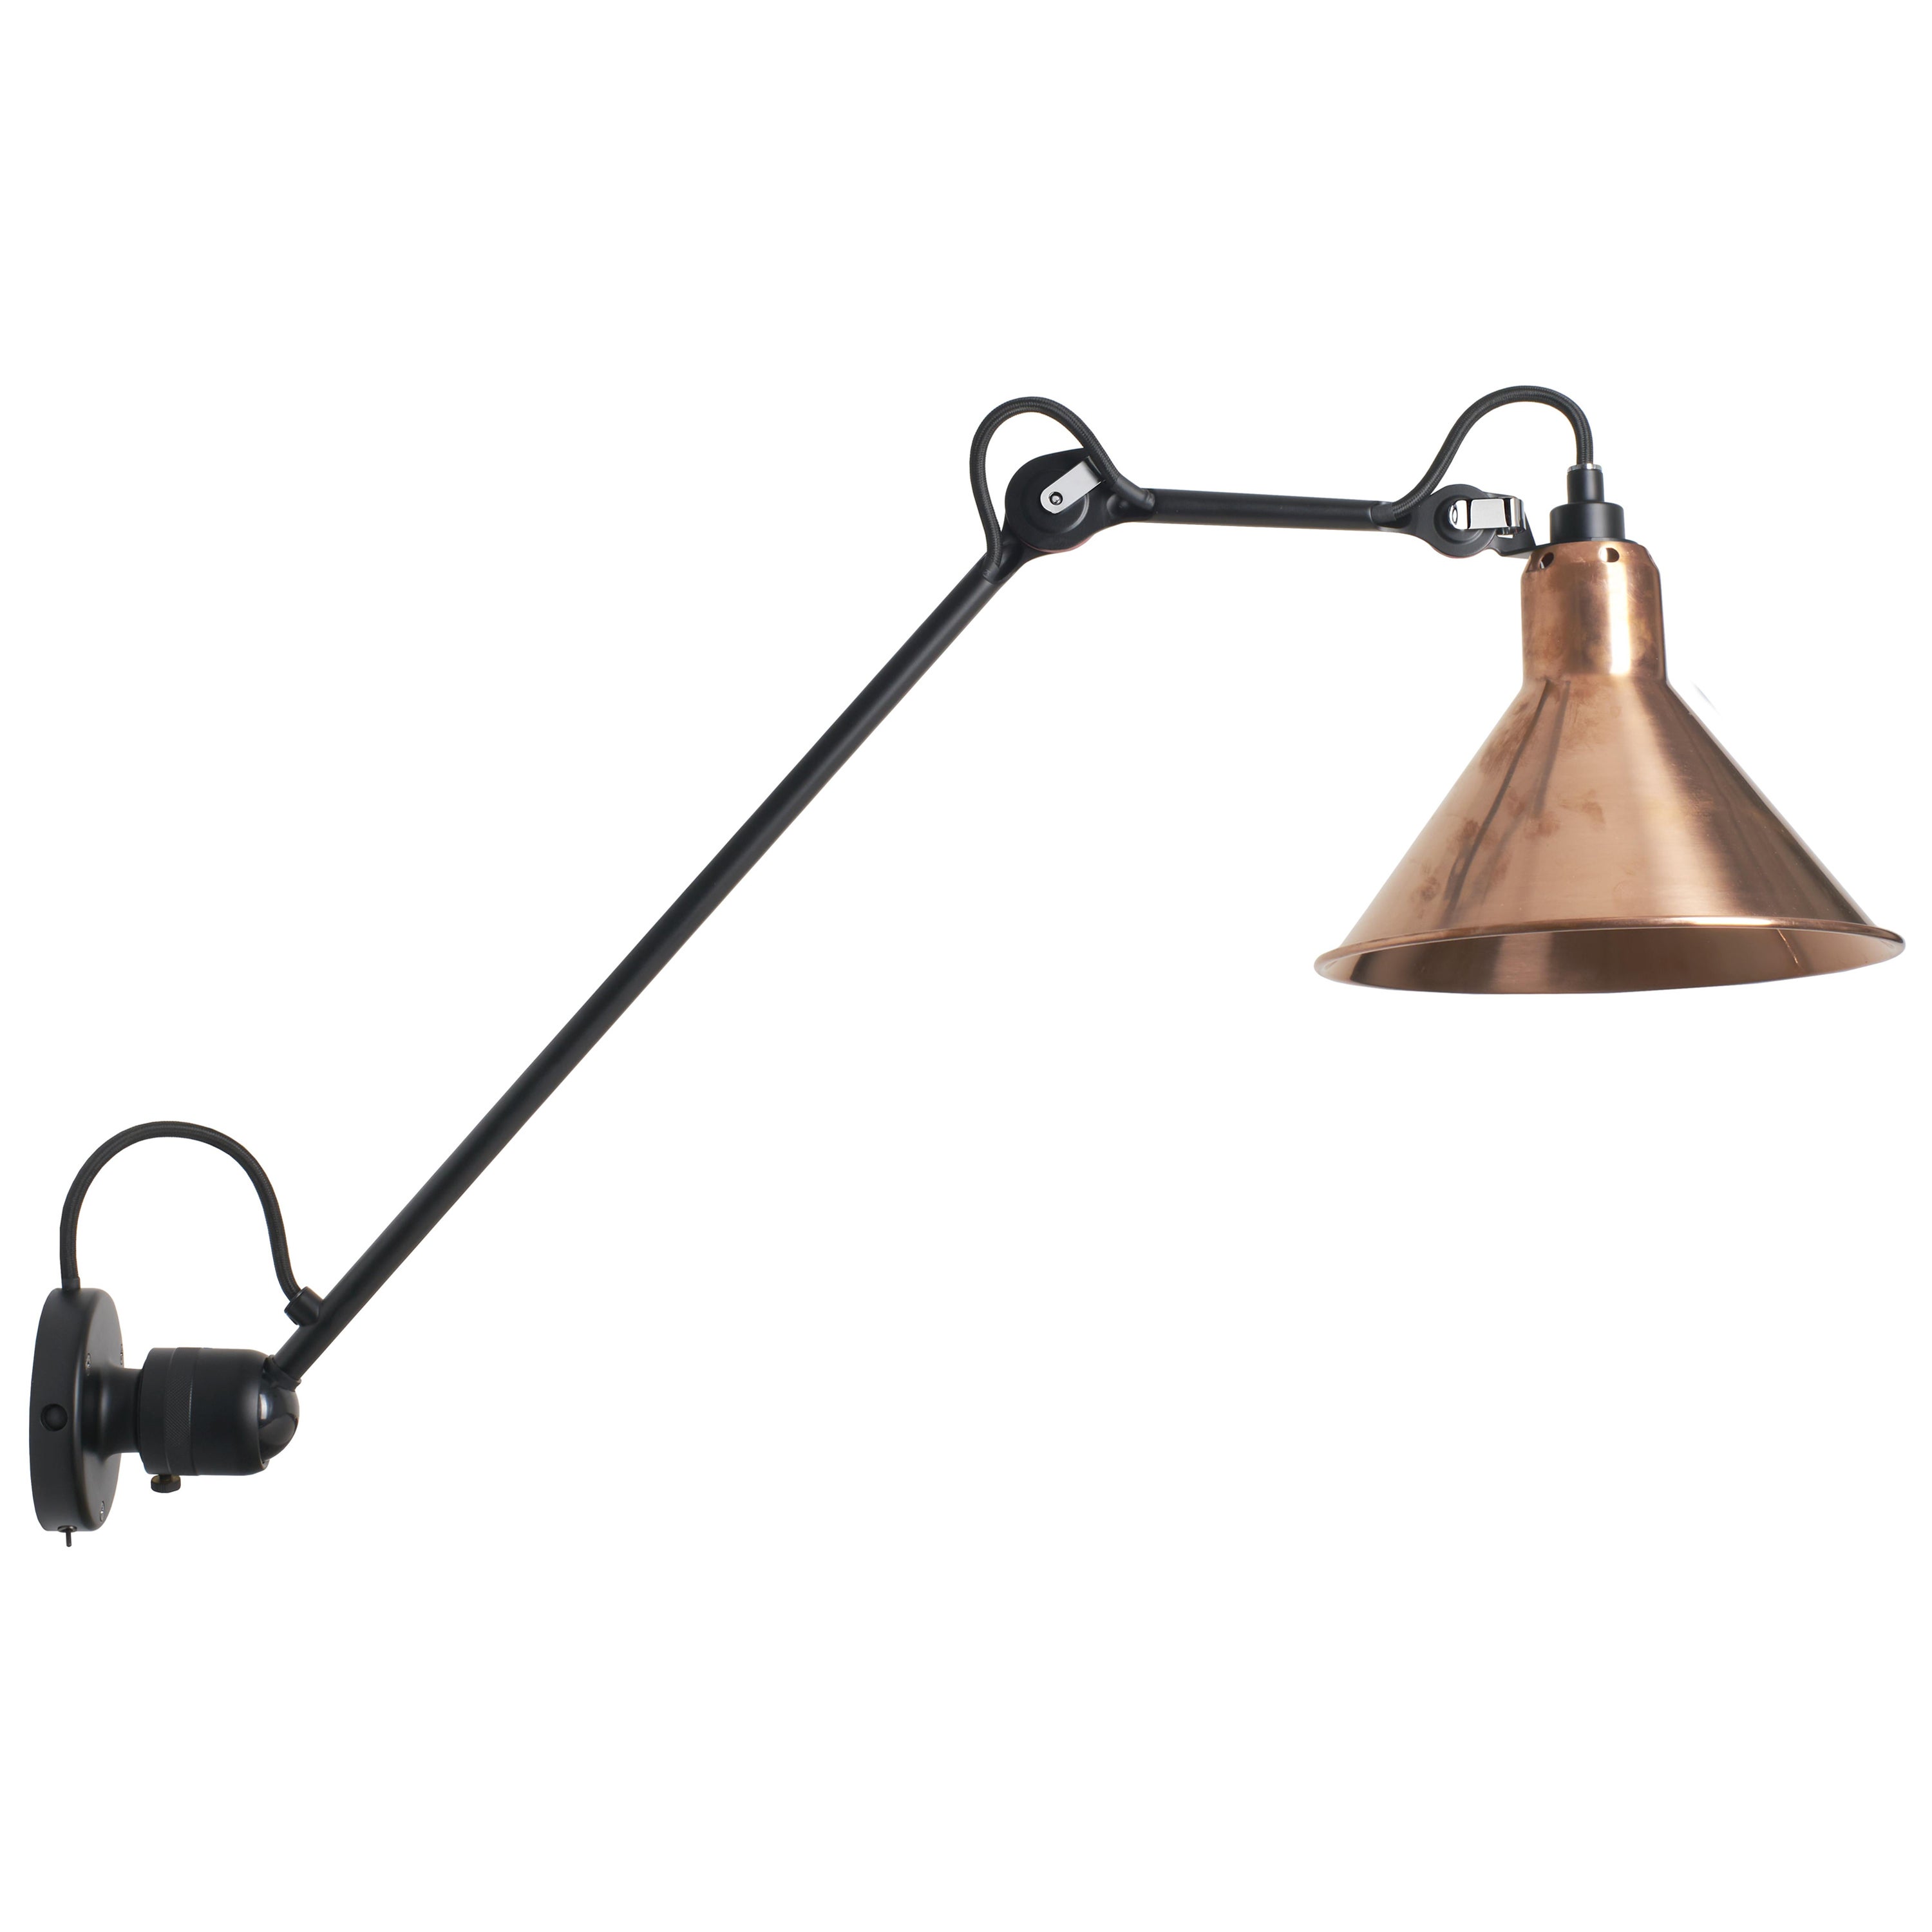 DCW Editions La Lampe Gras N°304 L40 SW Conic Wall Lamp in Raw Copper Shade For Sale